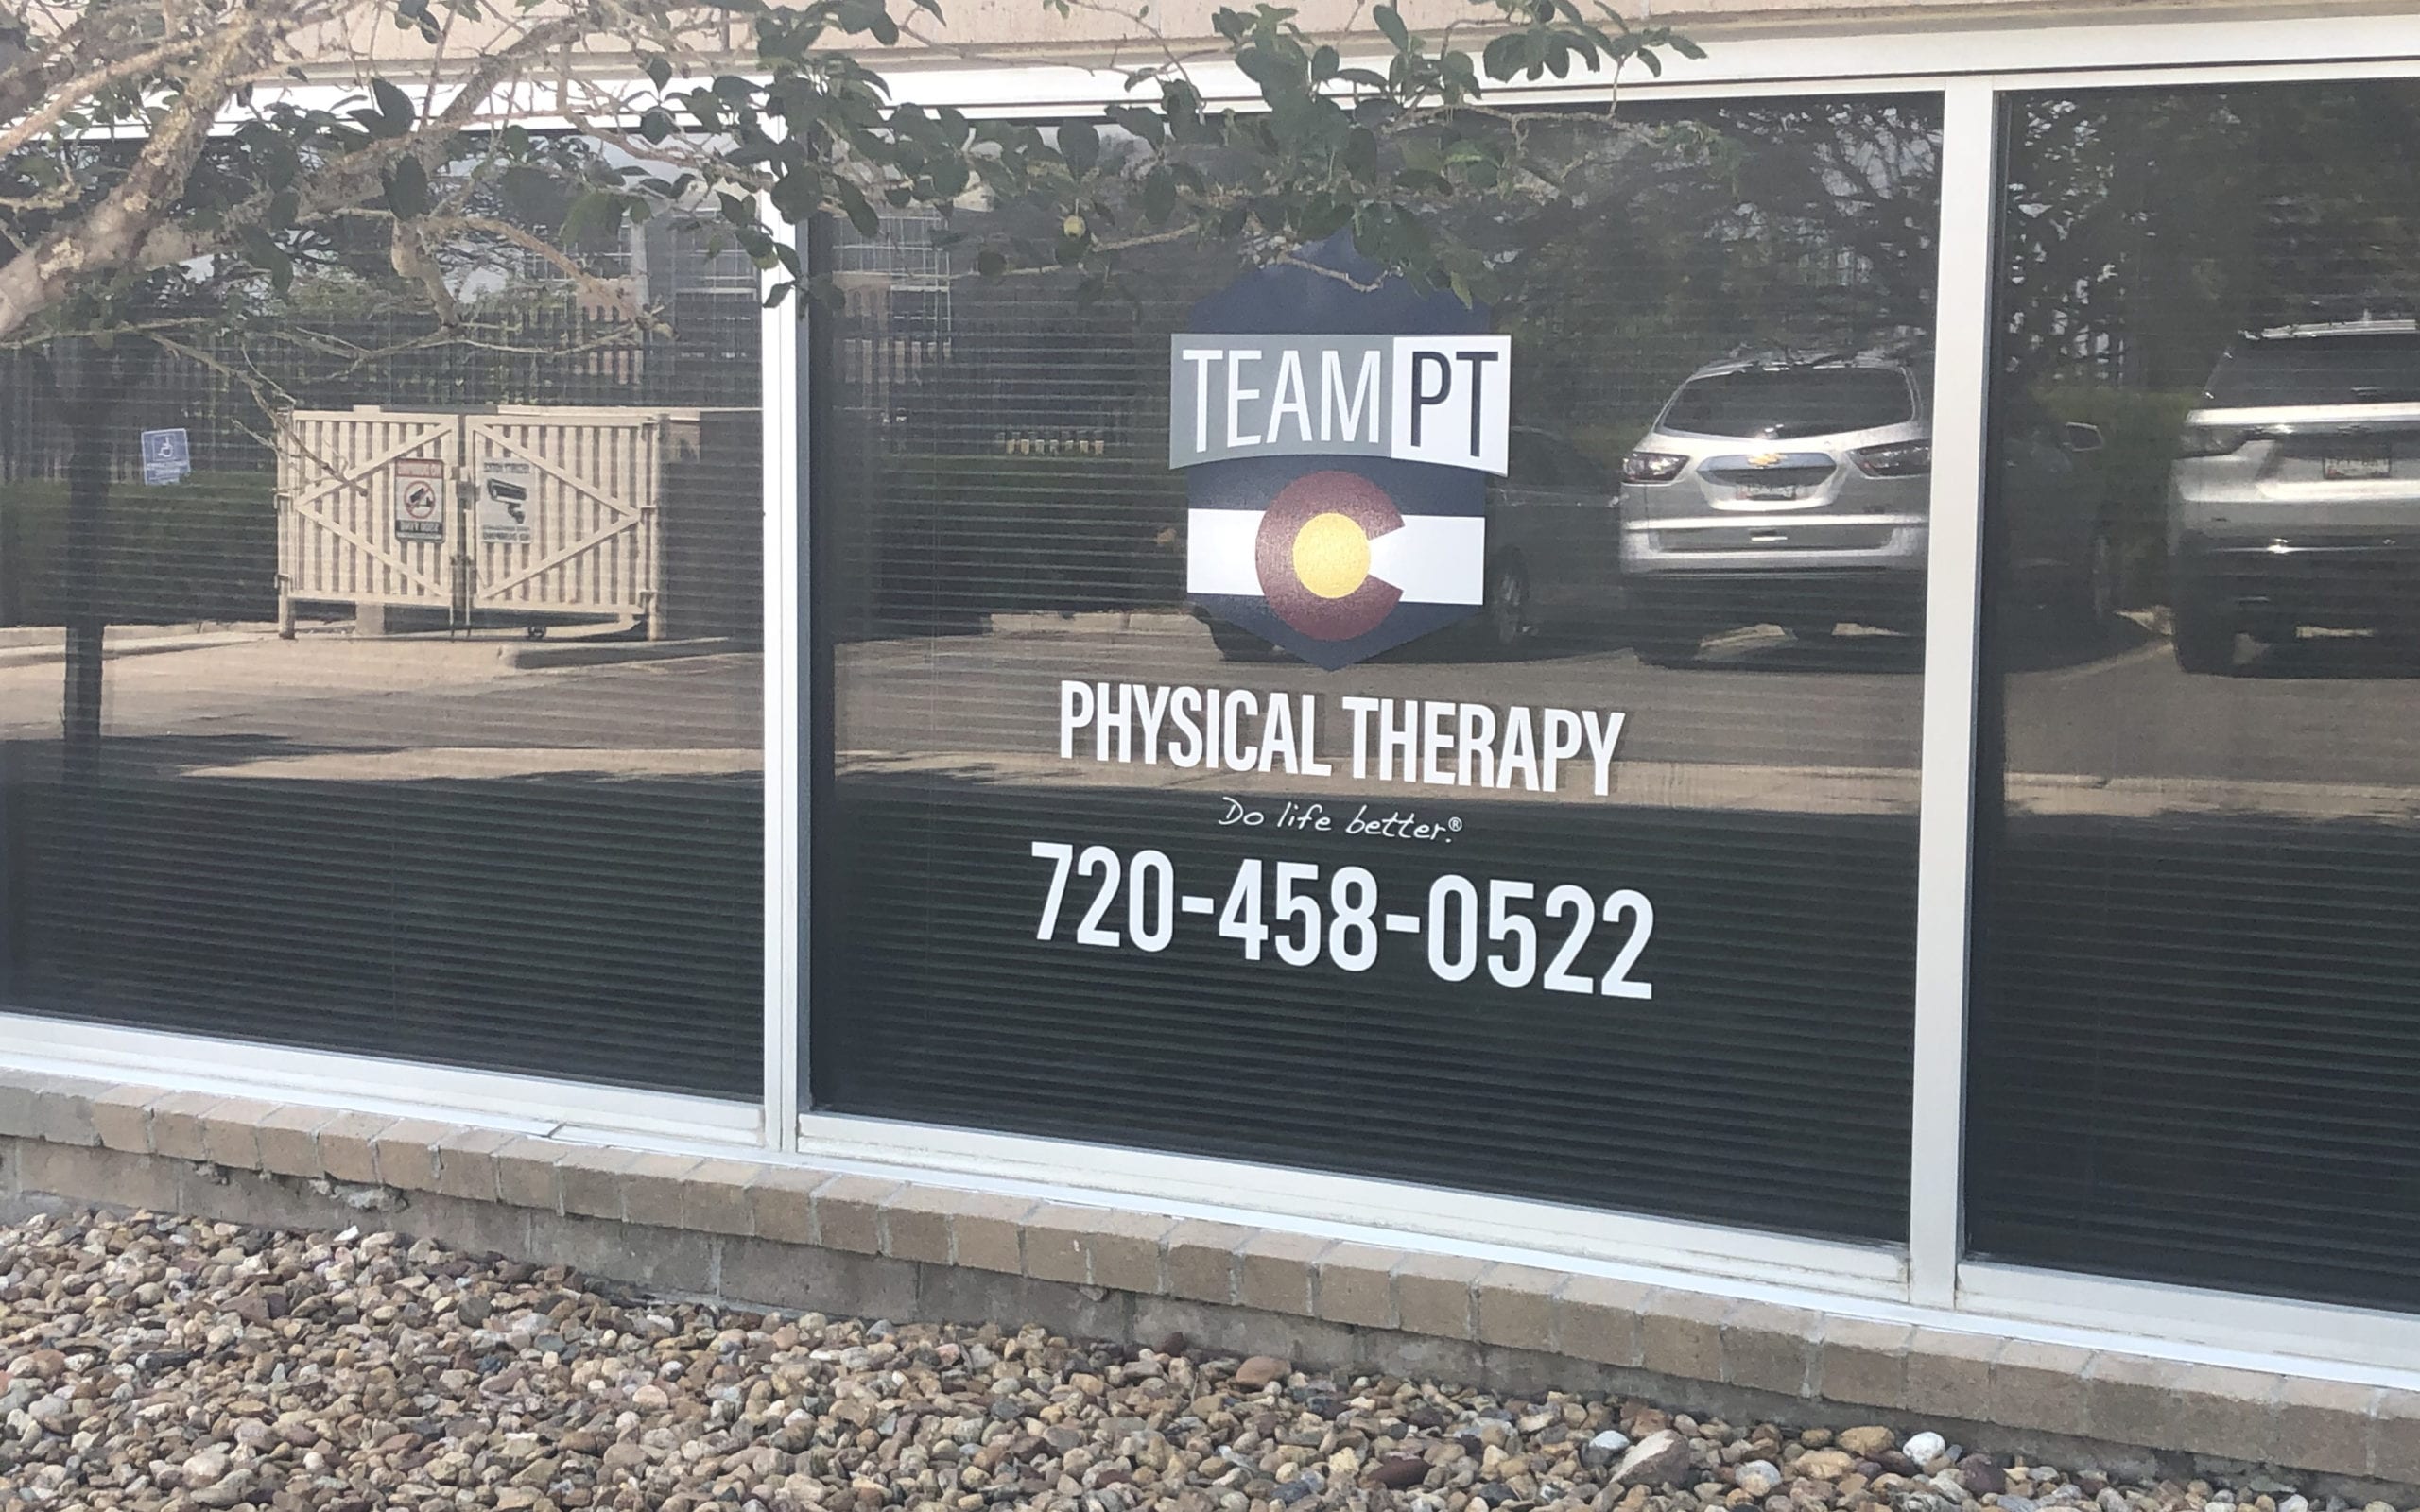 Outside team PT location highlands ranch CO